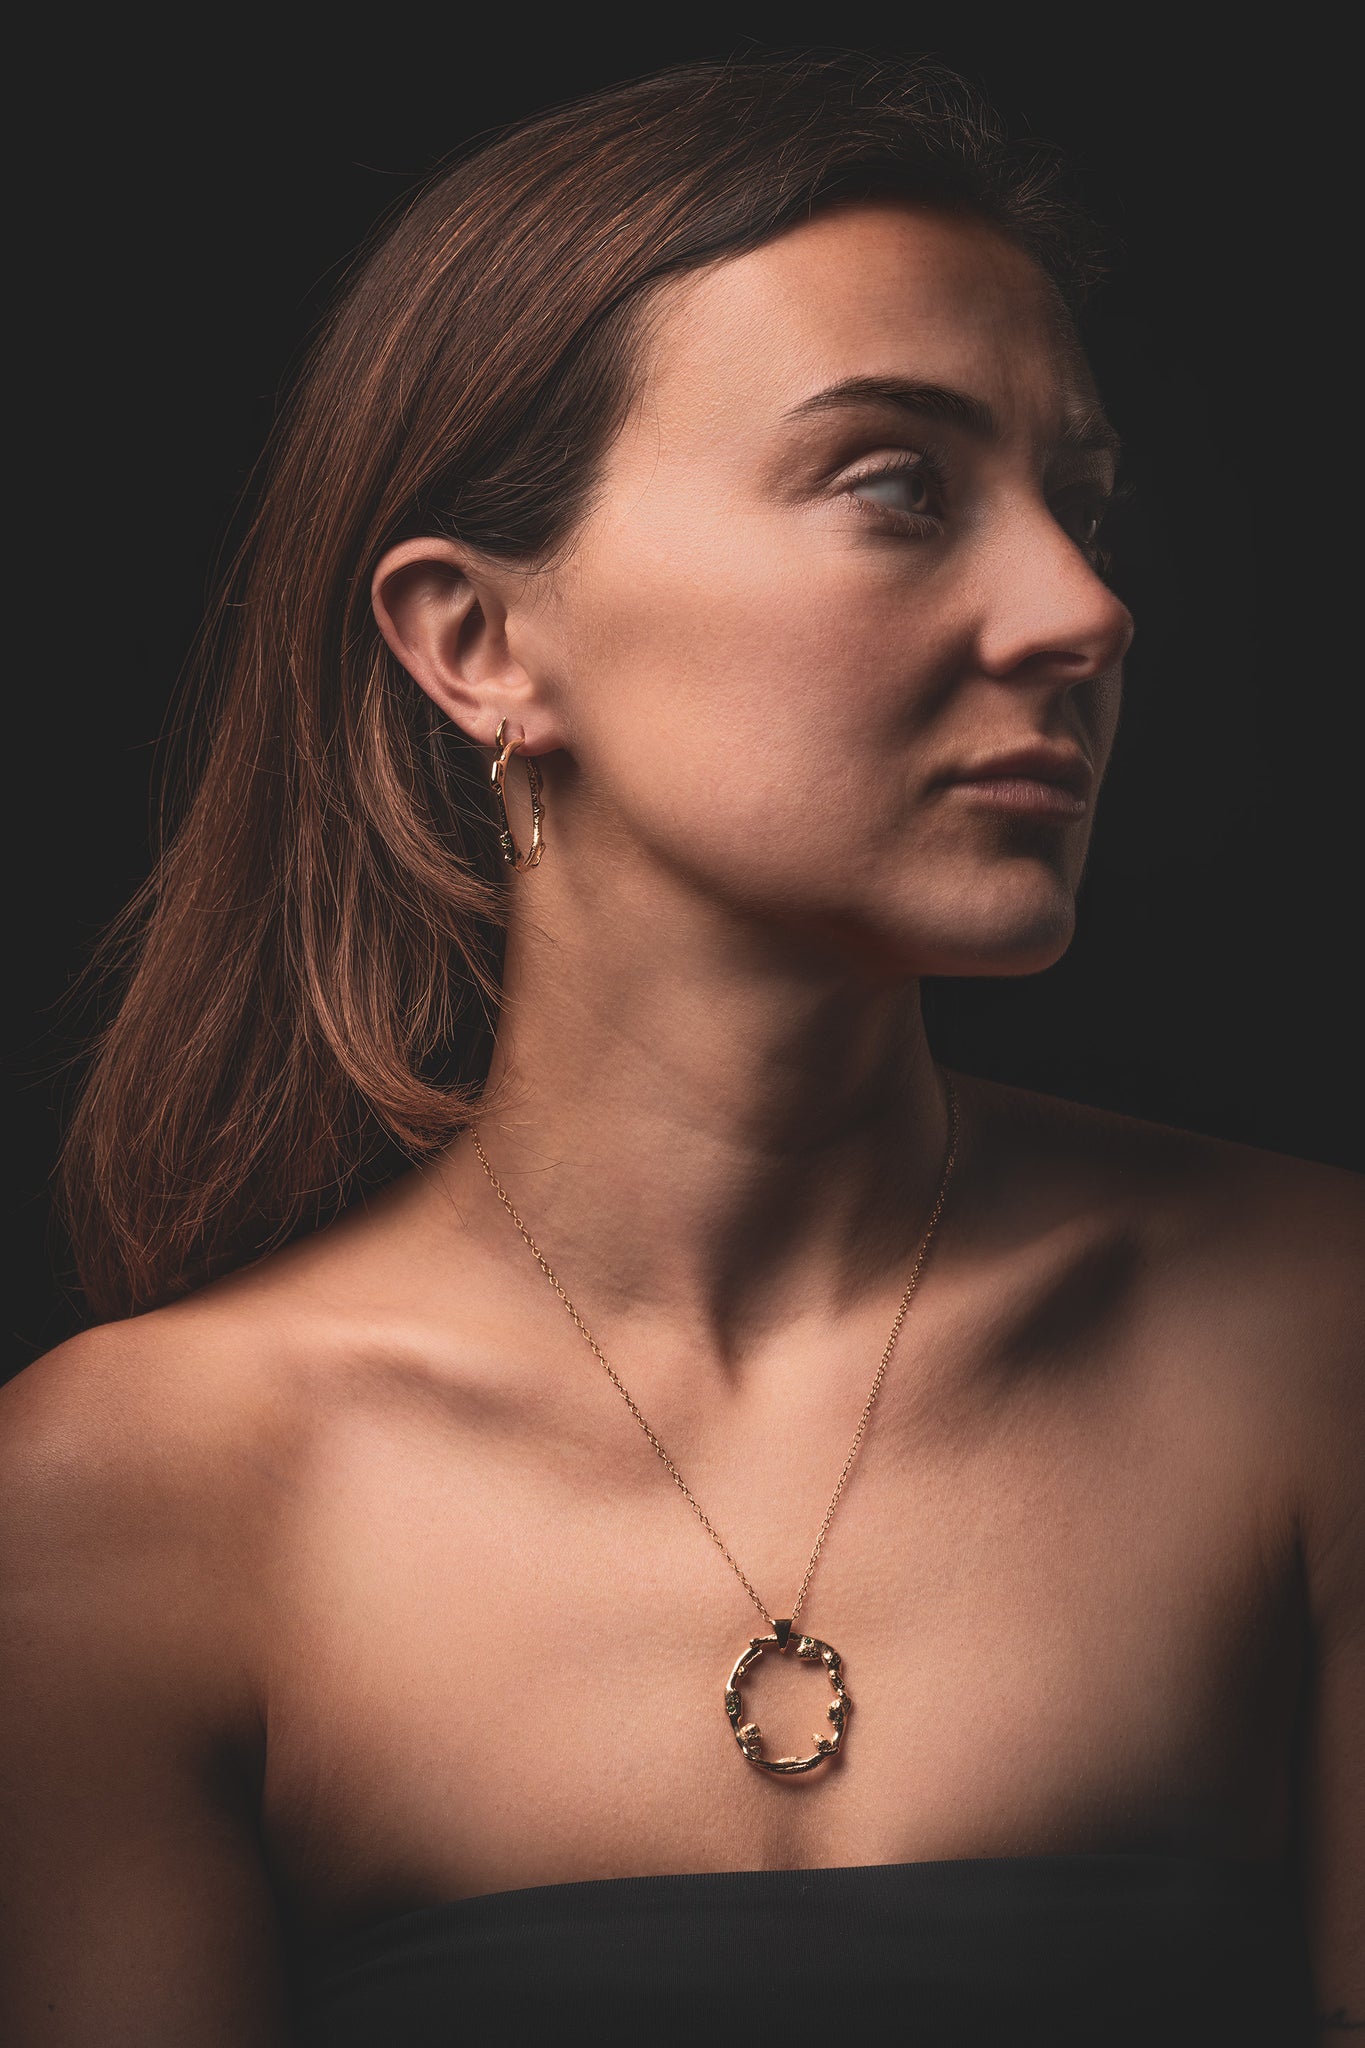 Portrait of a woman showcasing the 'Taormina' collection by 'What If You Stayed', featuring handcrafted gold necklace and earrings against a dark background.